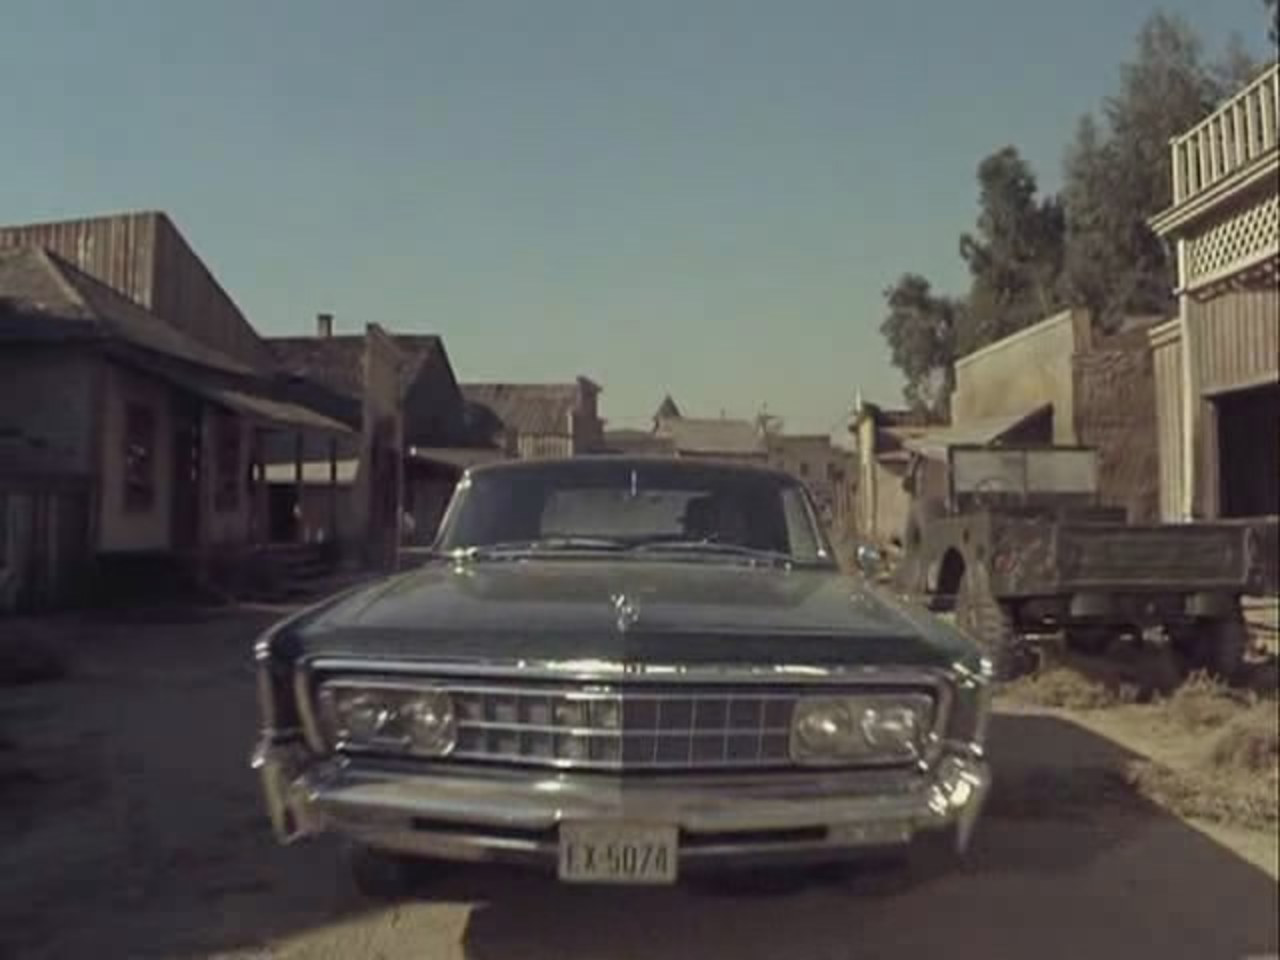 IMCDb.org: 1966 Imperial unknown in "The Man from U.N.C.L.E., 1964-